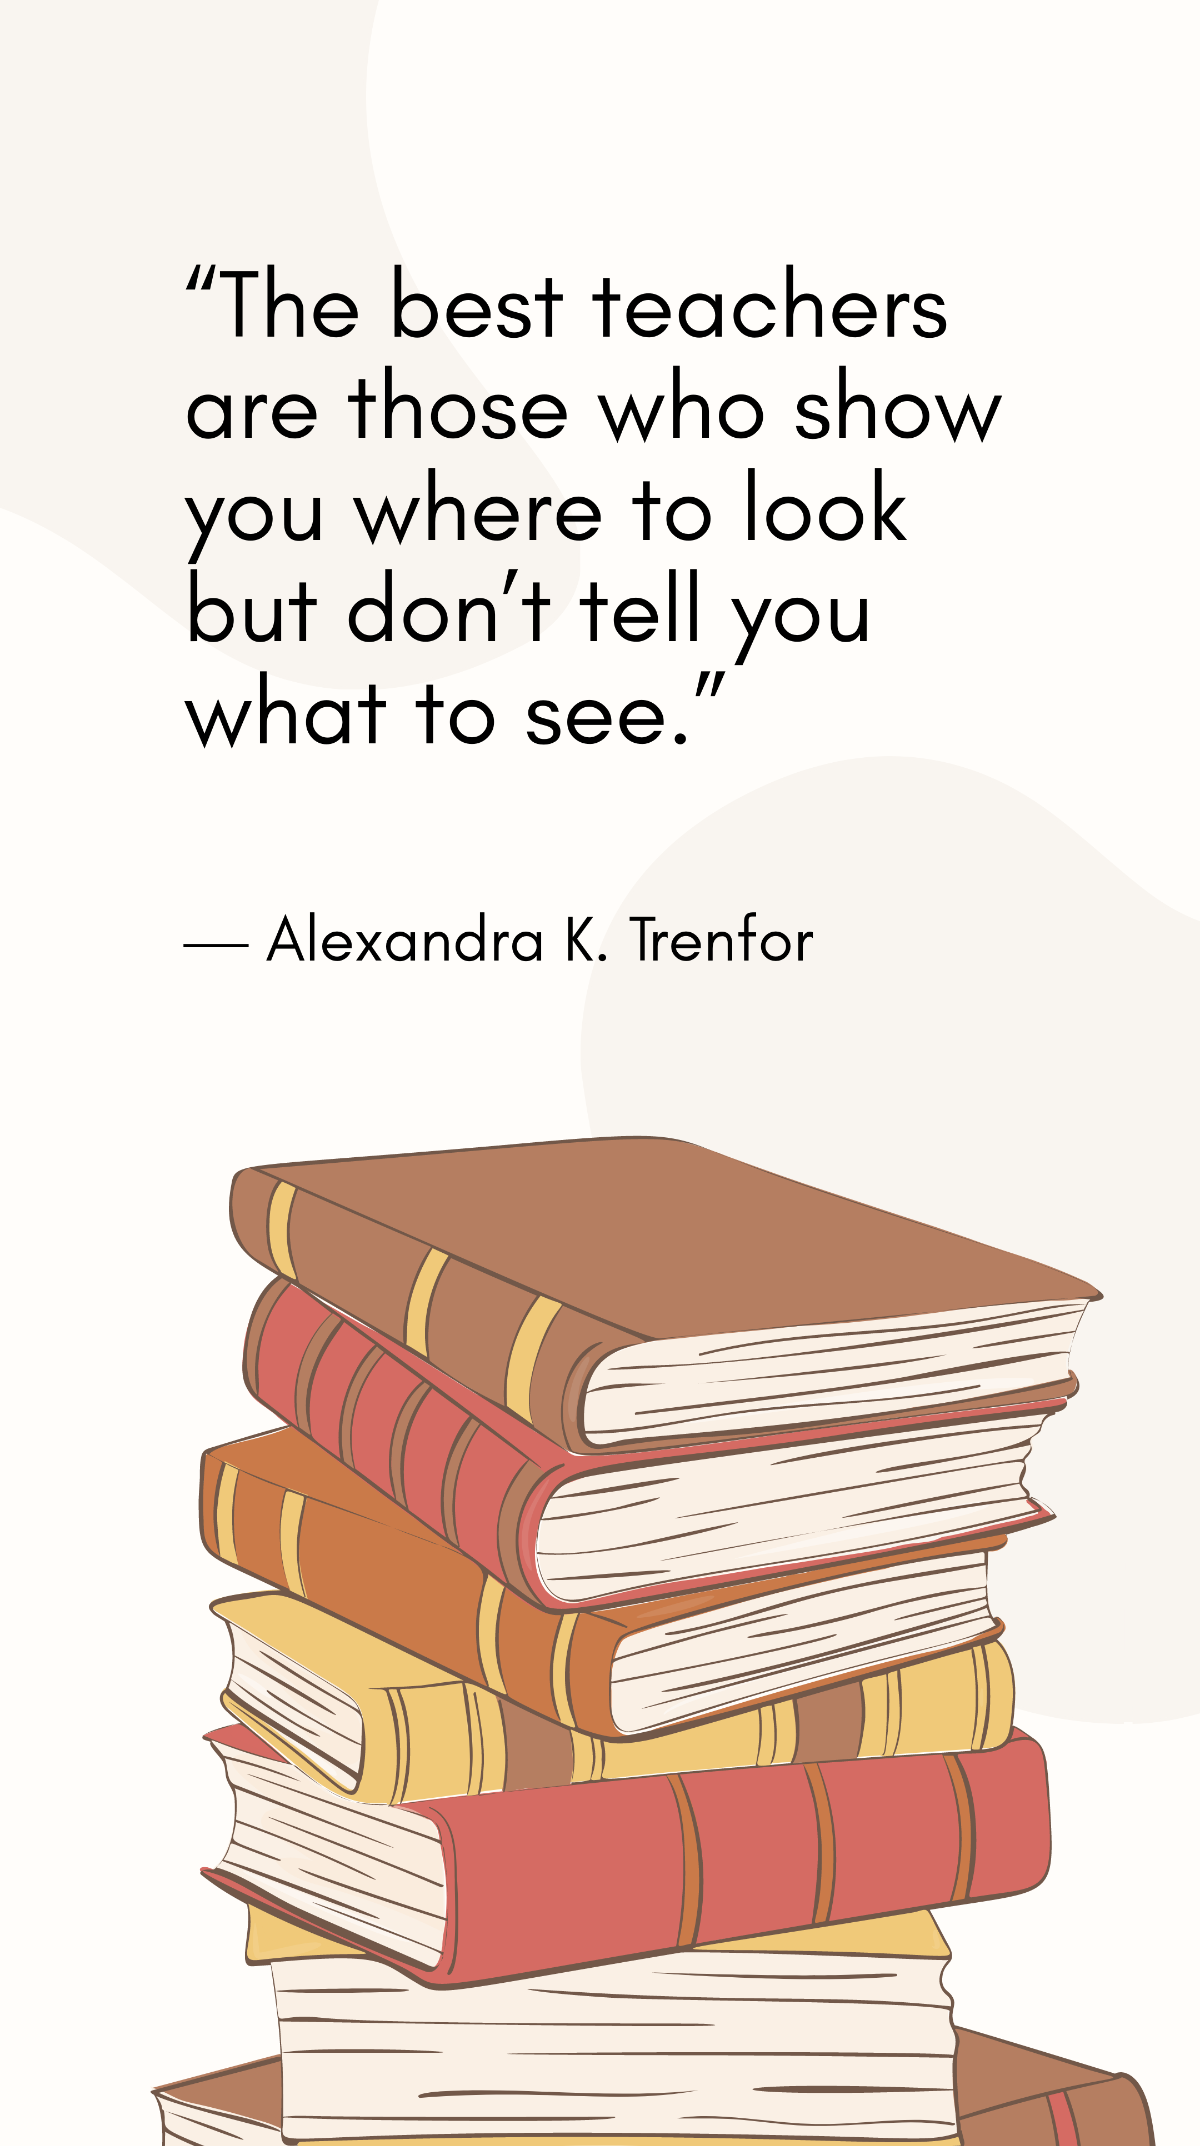 Free Alexandra K. Trenfor - The best teachers are those who show you where to look but don’t tell you what to see. Template